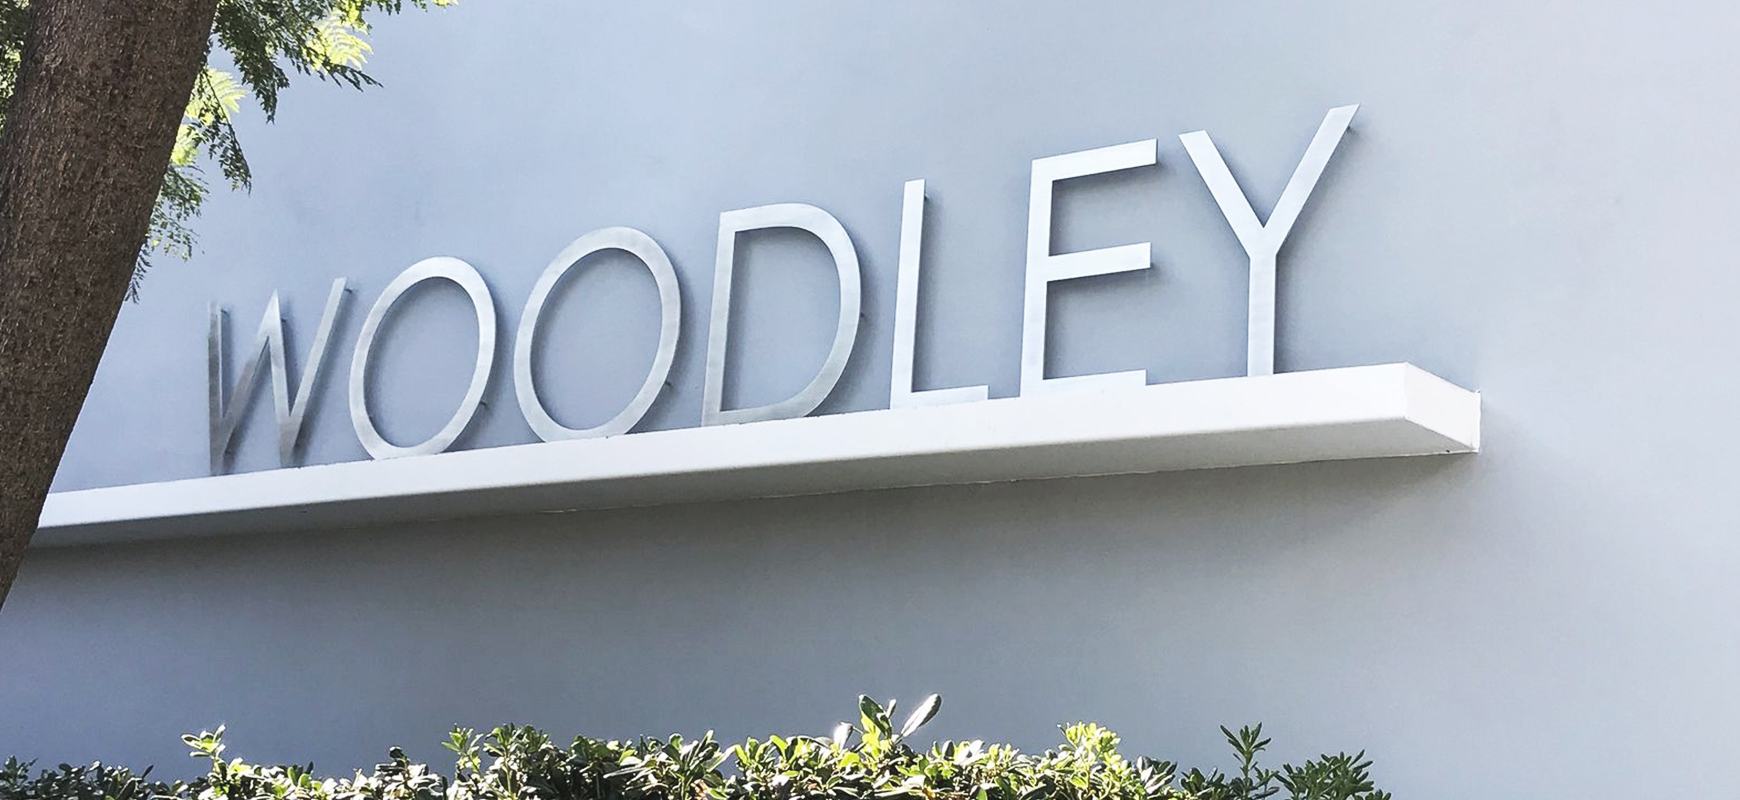 Woodley custom aluminum sign with brand name letters for outdoor branding